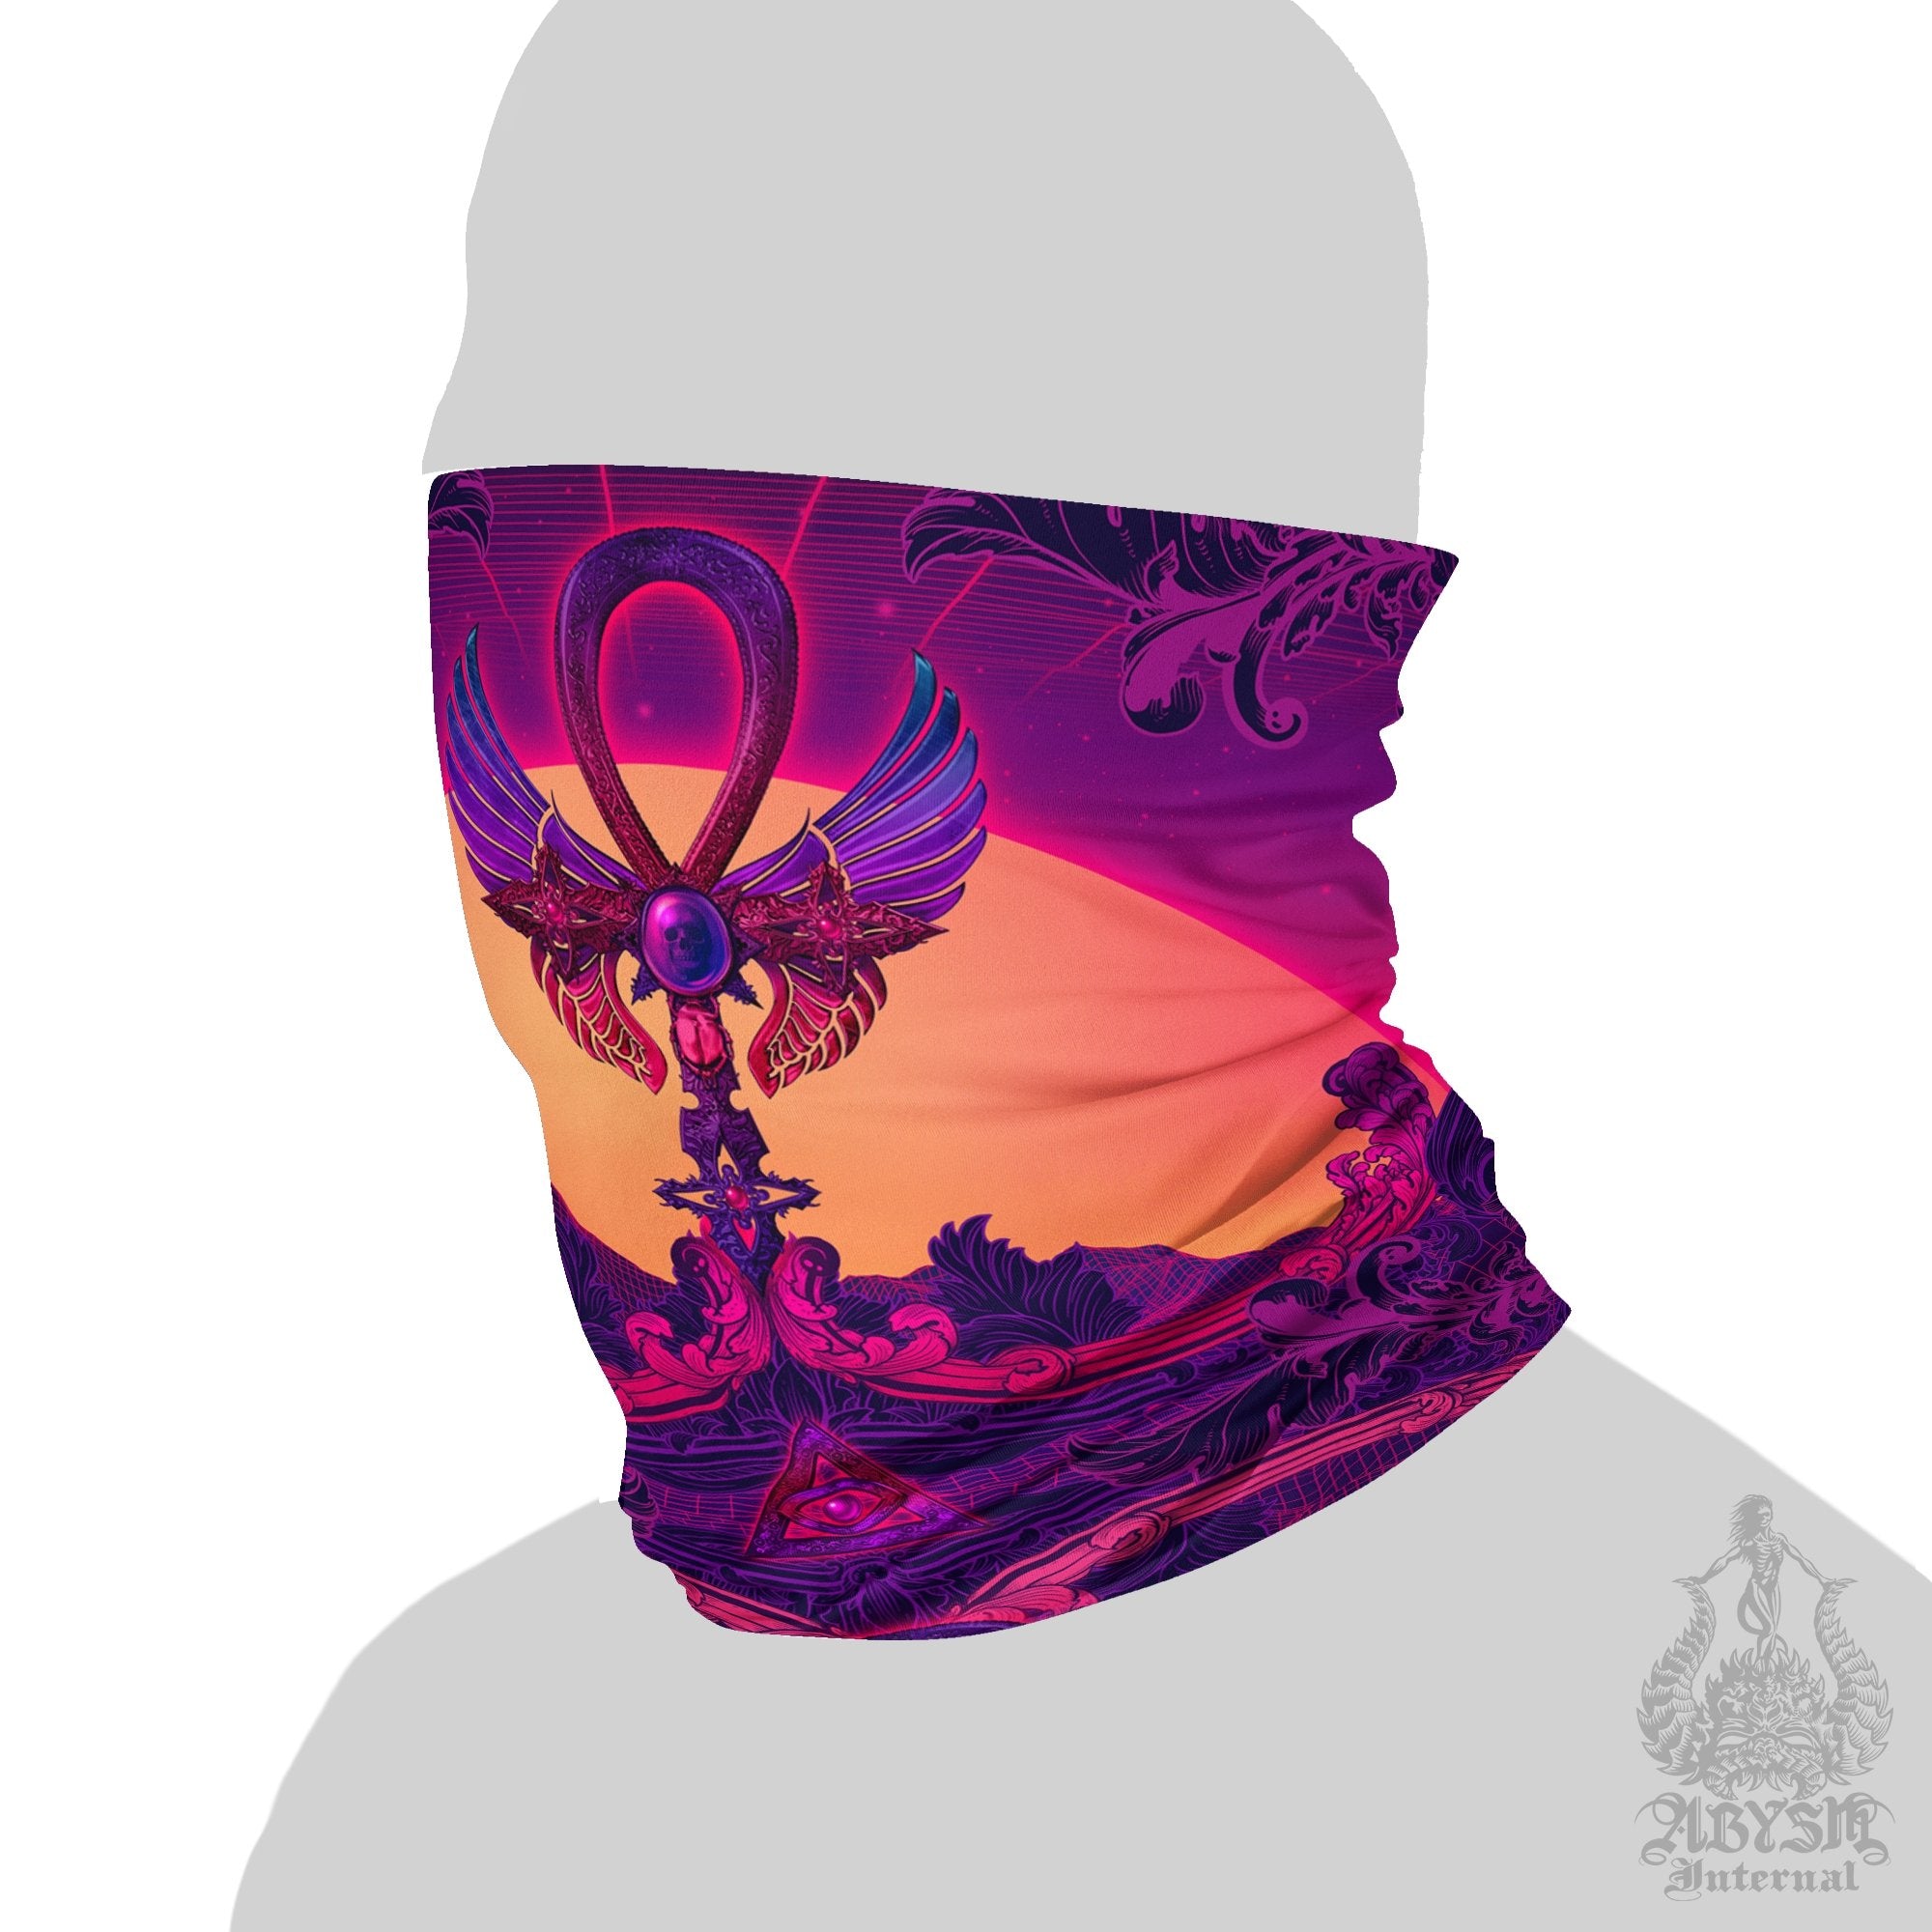 Vaporwave Neck Gaiter, Face Mask, Synthwave Head Covering, Psychedelic 80s Retrowave, Rave Festival Outfit - Ankh - Abysm Internal